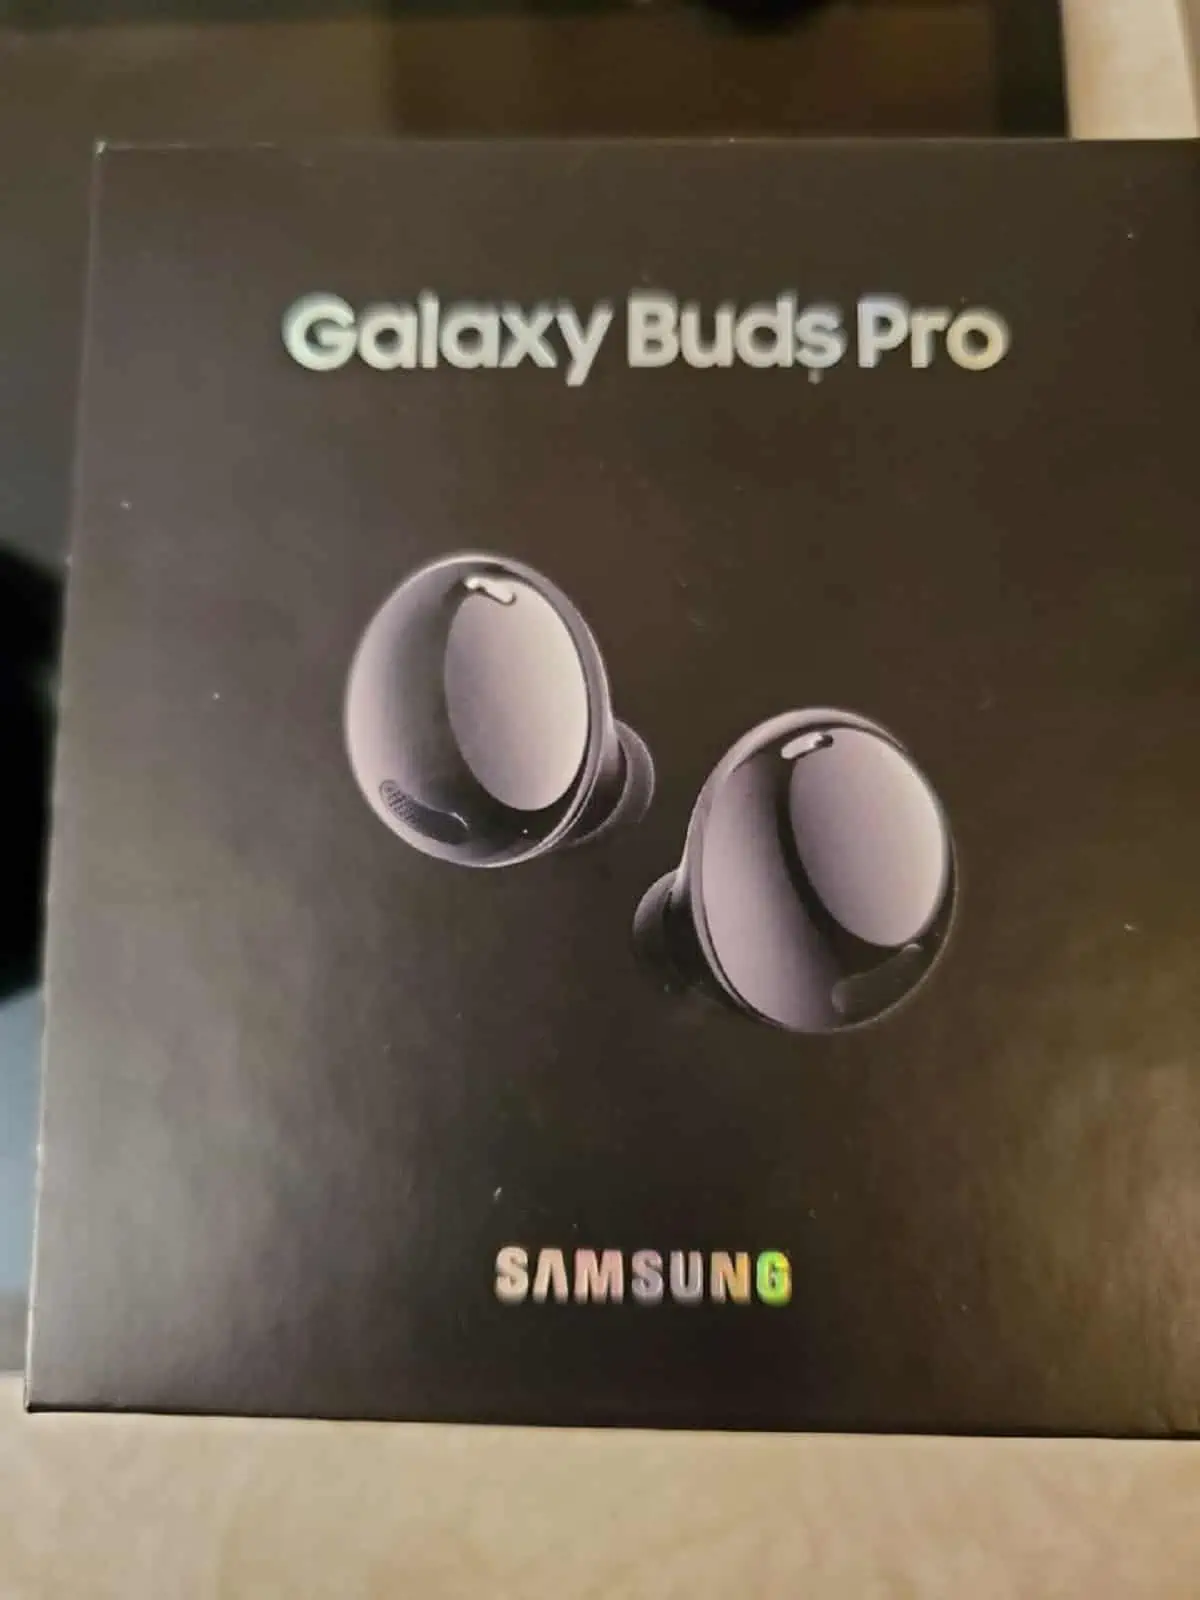 Some-one is selling a set of Samsung Galaxy Buds Pro on